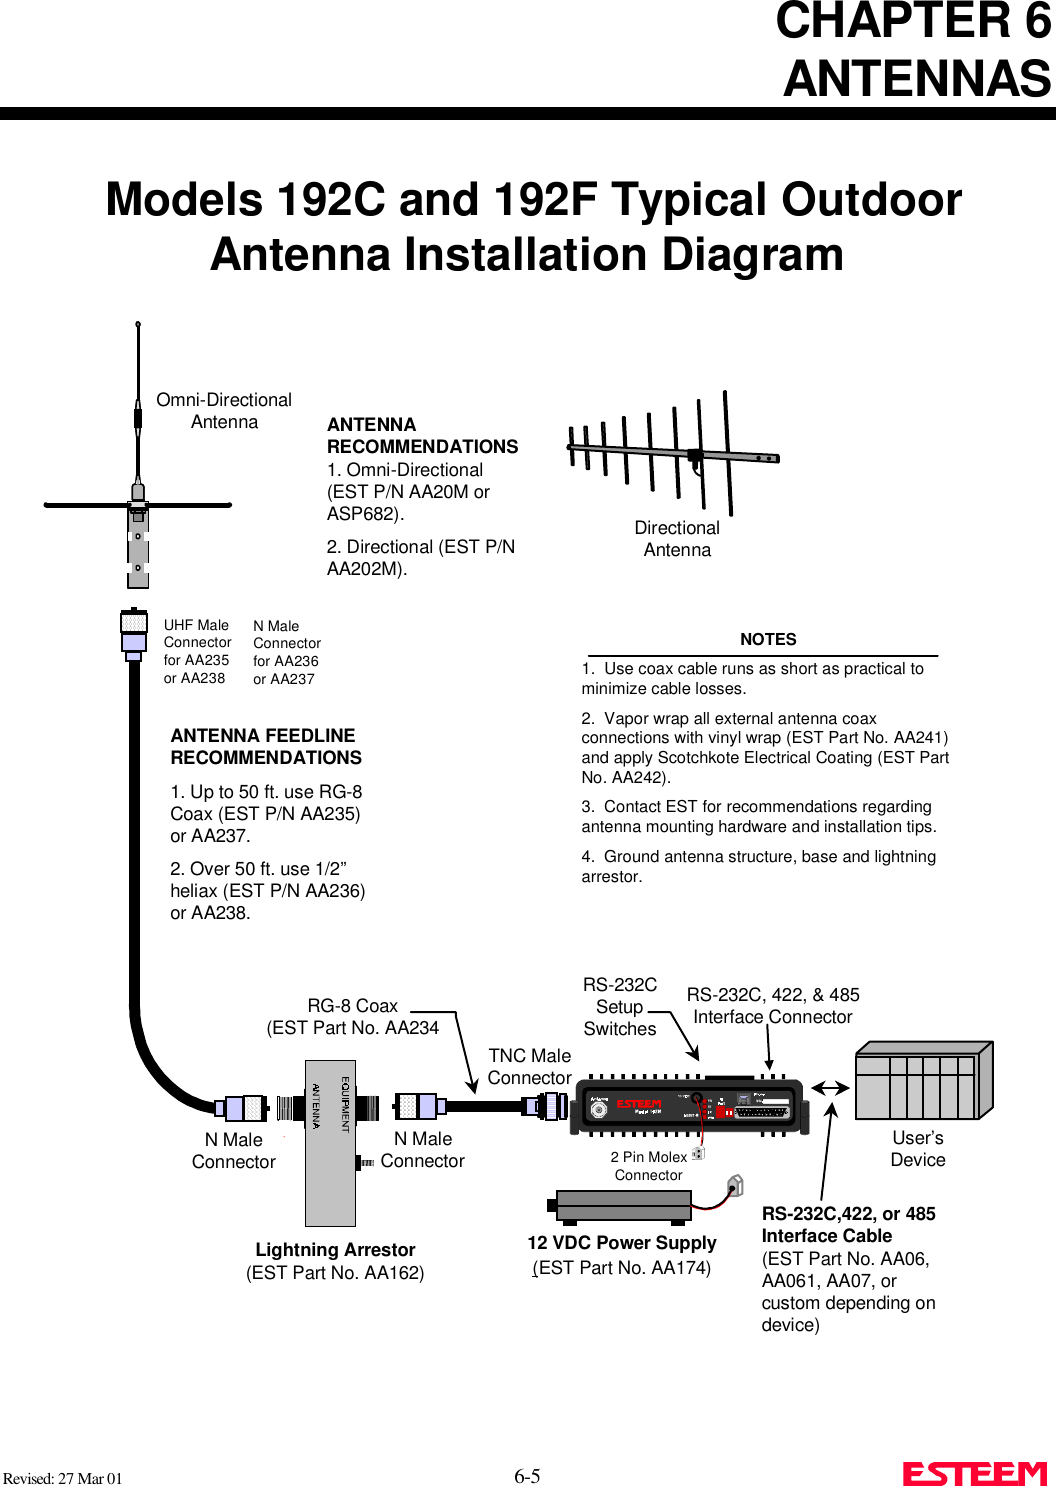 CHAPTER 6ANTENNASRevised: 27 Mar 01 6-5 Models 192C and 192F Typical OutdoorAntenna Installation DiagramN MaleConnectorN MaleConnectorTNC MaleConnector2 Pin MolexConnectorUser’sDeviceRG-8 Coax(EST Part No. AA234RS-232CSetupSwitchesRS-232C, 422, &amp; 485Interface ConnectorNOTES1.  Use coax cable runs as short as practical tominimize cable losses.2.  Vapor wrap all external antenna coaxconnections with vinyl wrap (EST Part No. AA241)and apply Scotchkote Electrical Coating (EST PartNo. AA242).3.  Contact EST for recommendations regardingantenna mounting hardware and installation tips.4.  Ground antenna structure, base and lightningarrestor.ANTENNARECOMMENDATIONS1. Omni-Directional(EST P/N AA20M orASP682).2. Directional (EST P/NAA202M).DirectionalAntennaOmni-DirectionalAntennaUHF MaleConnectorfor AA235or AA238ANTENNA FEEDLINERECOMMENDATIONS1. Up to 50 ft. use RG-8Coax (EST P/N AA235)or AA237.2. Over 50 ft. use 1/2”heliax (EST P/N AA236)or AA238.N MaleConnectorfor AA236or AA23712 VDC Power Supply(EST Part No. AA174)RS-232C,422, or 485Interface Cable(EST Part No. AA06,AA061, AA07, orcustom depending ondevice)Lightning Arrestor(EST Part No. AA162)